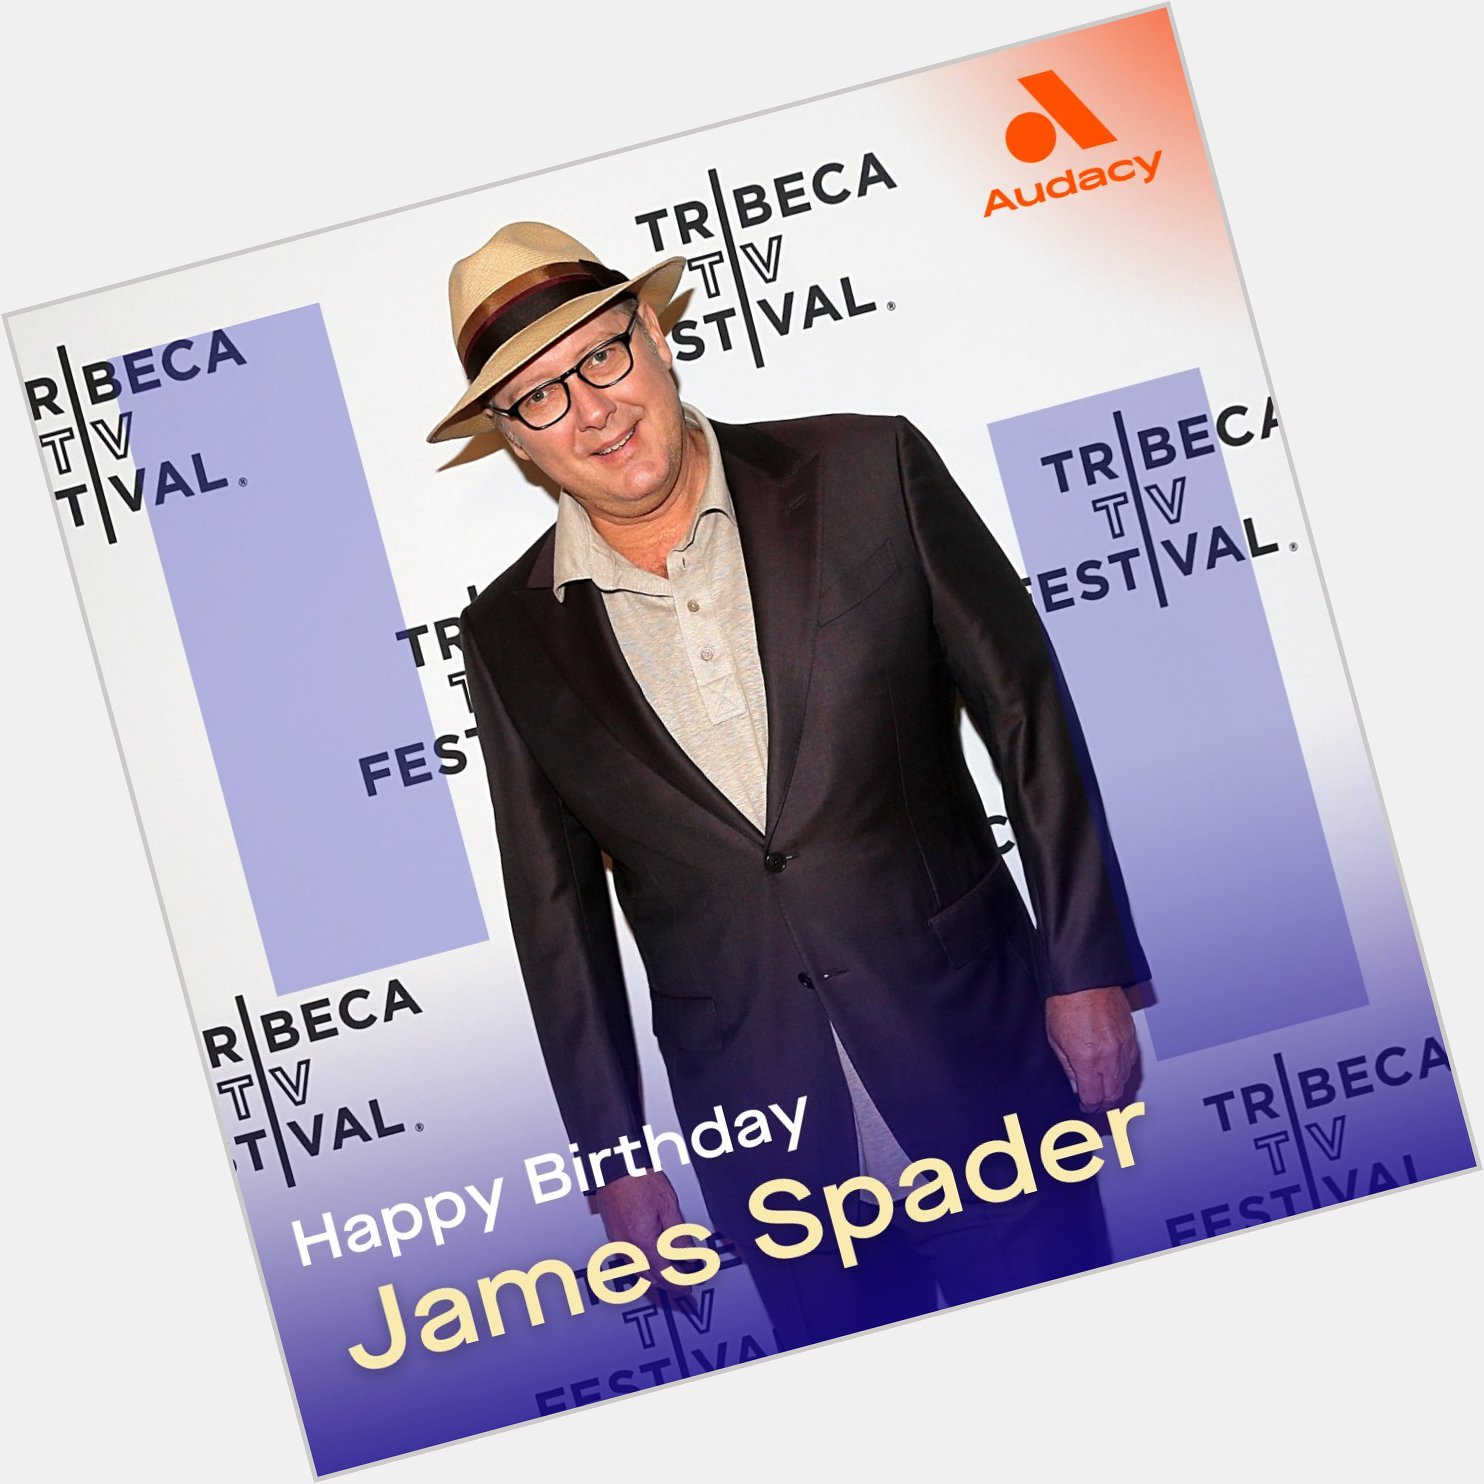 Happy 62nd birthday, James Spader! What was his best role? 
-Doug 